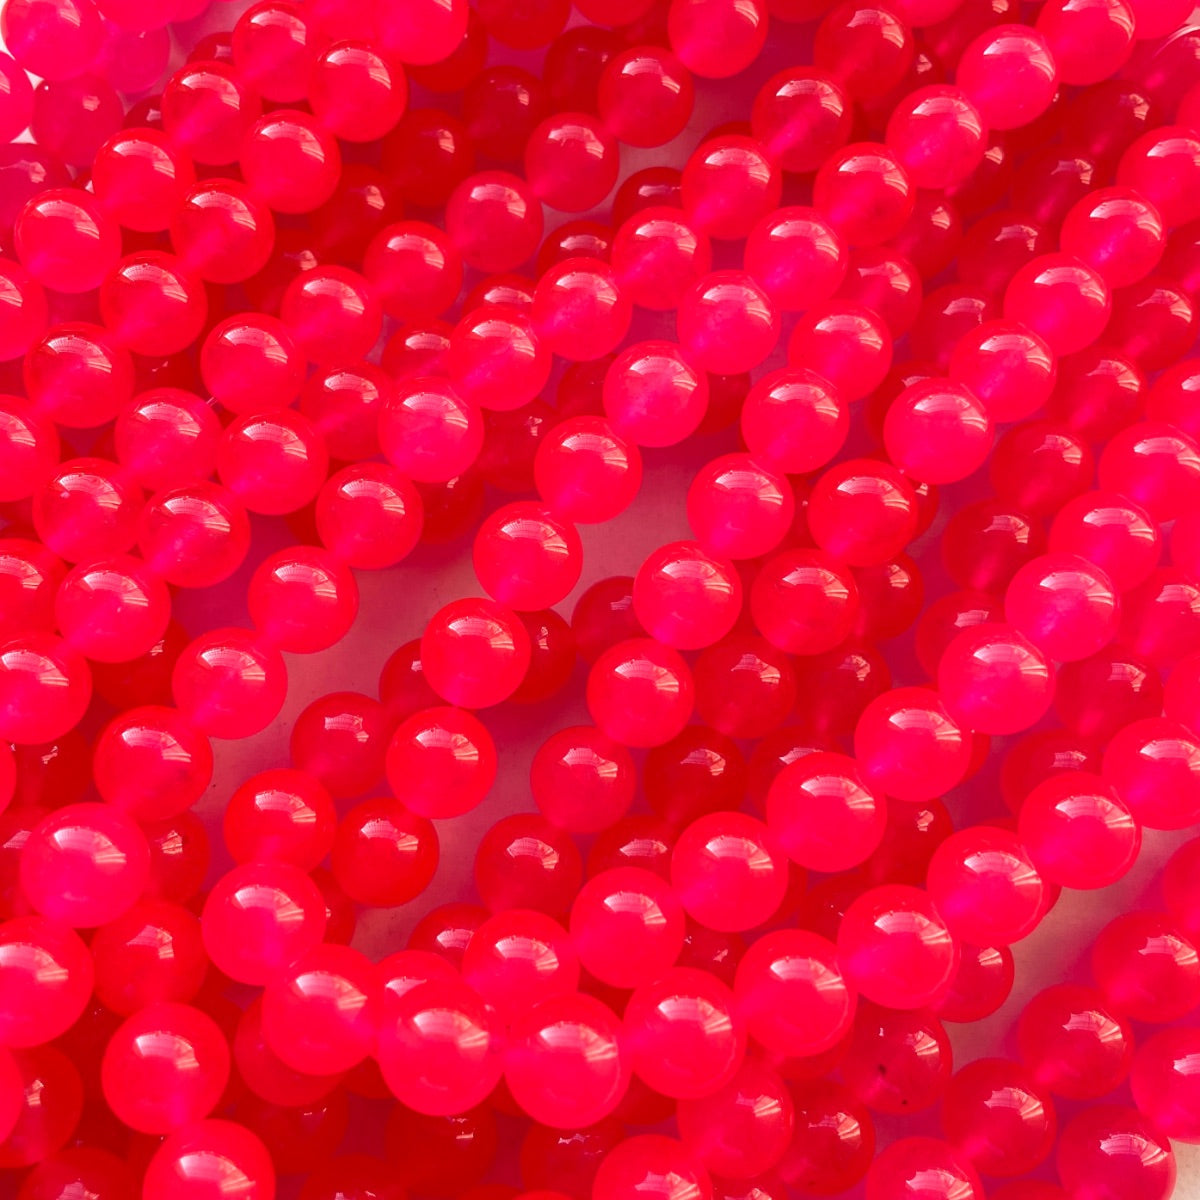 2 Strands/lot 10mm Colorful Candy Color Jade Stone Round Beads Hot Pink Stone Beads New Beads Arrivals Round Jade Beads Charms Beads Beyond